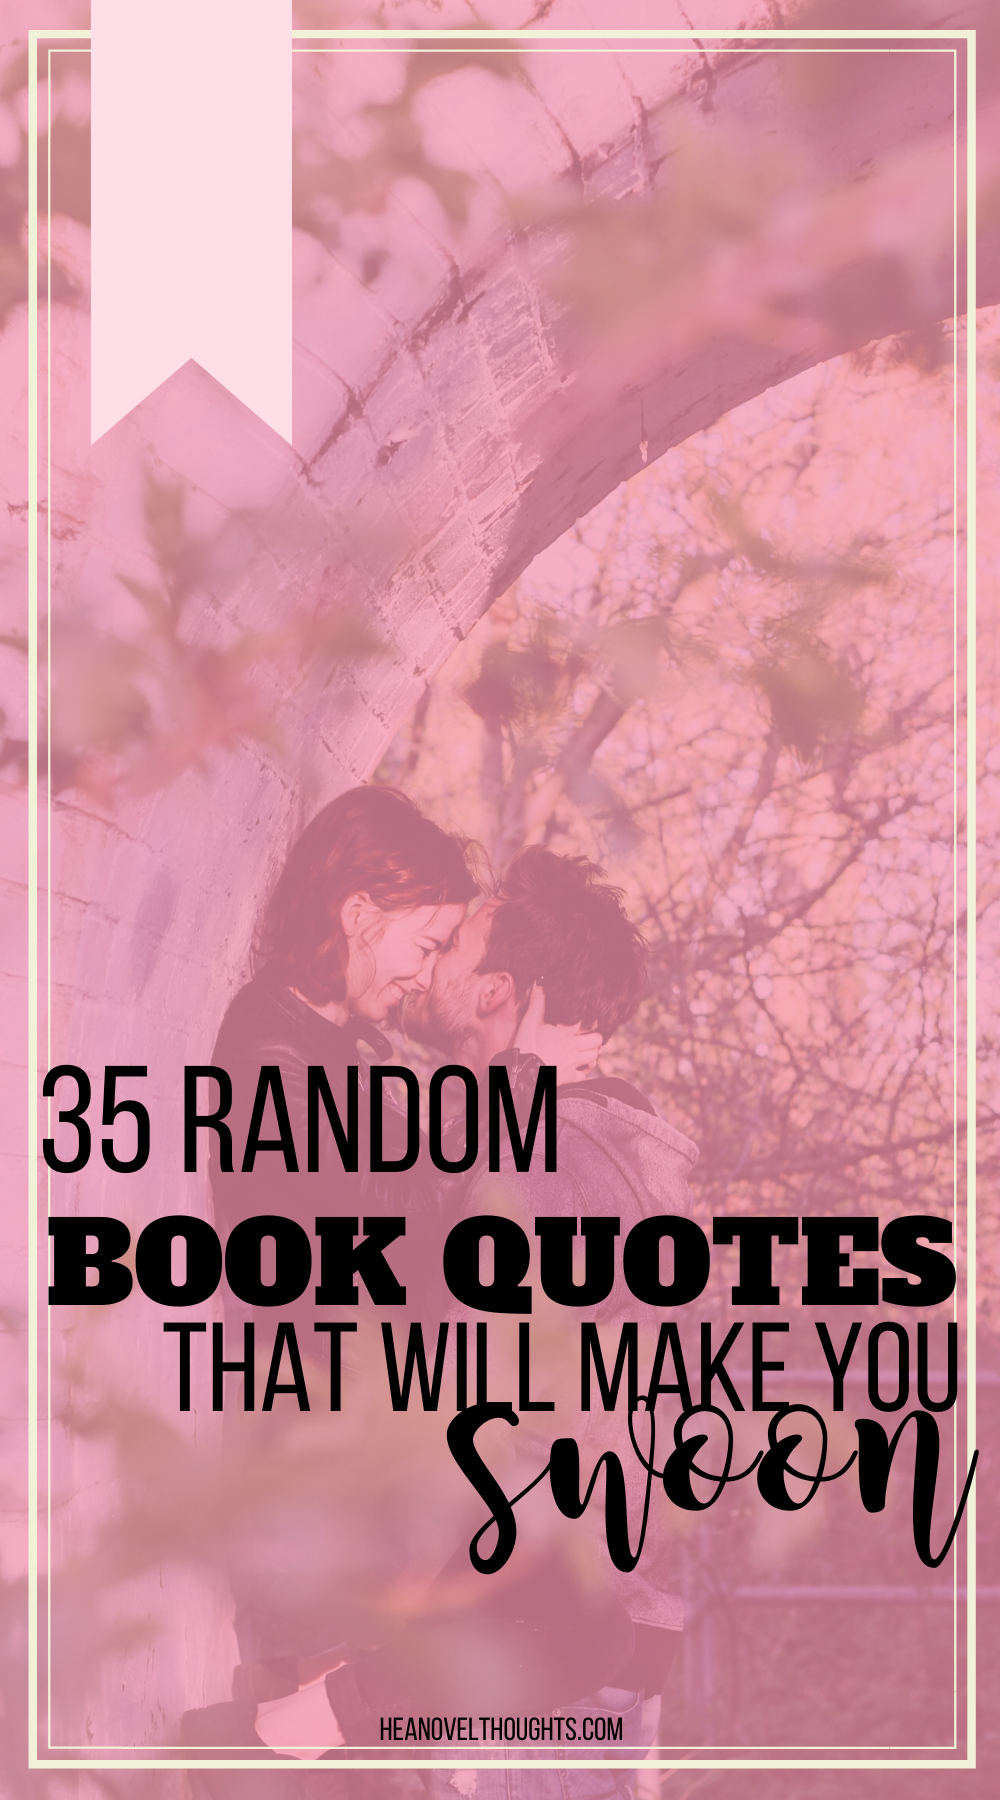 35 Random Book Quotes that will Make You Swoon